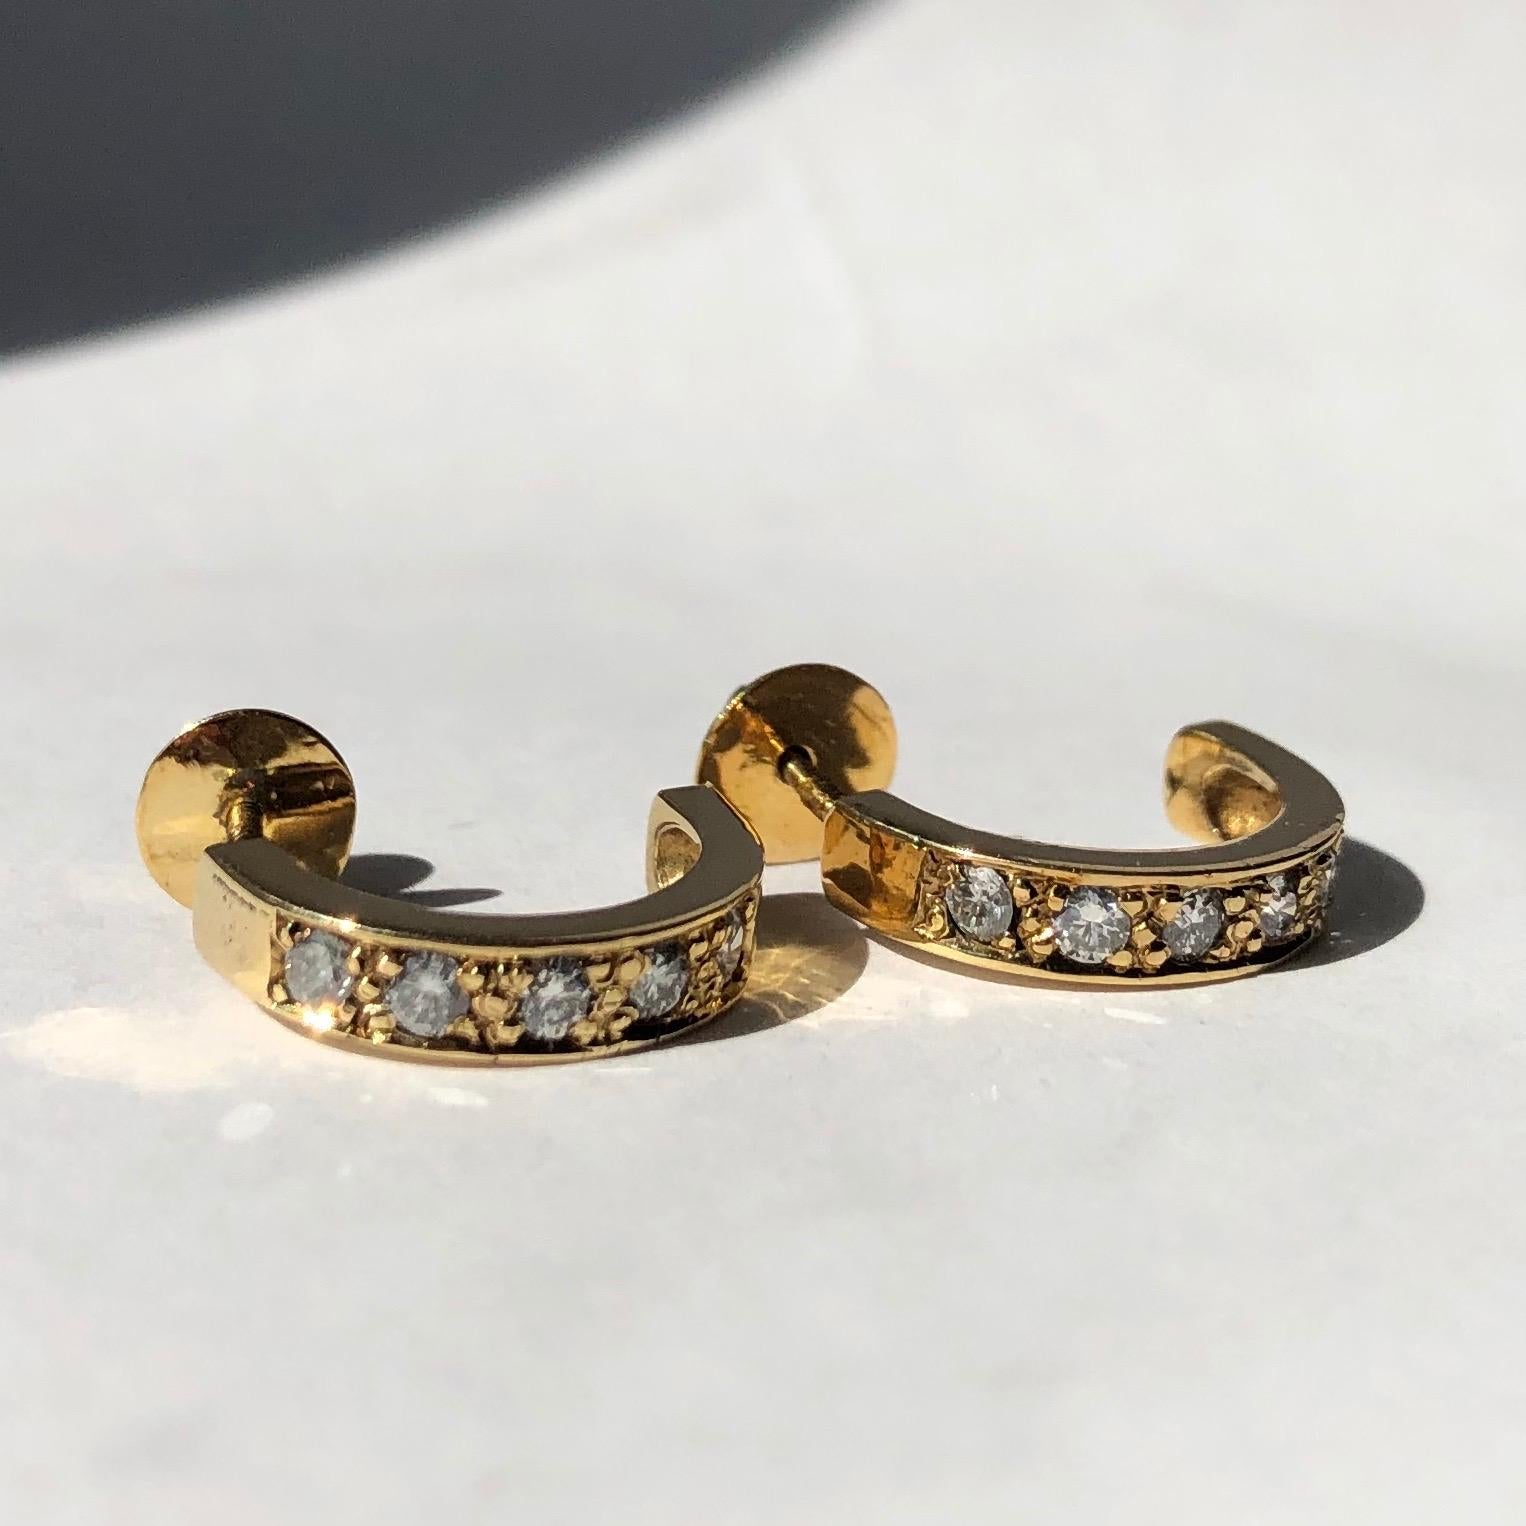 The old European cut diamonds have a wonderful sparkle and are set in 18ct yellow gold. The stones measure 25pts total per hoop and are set flush within the gold half hoop. The studs are screw back so are very secure. 

Hoop Width: 3mm 
Hoop